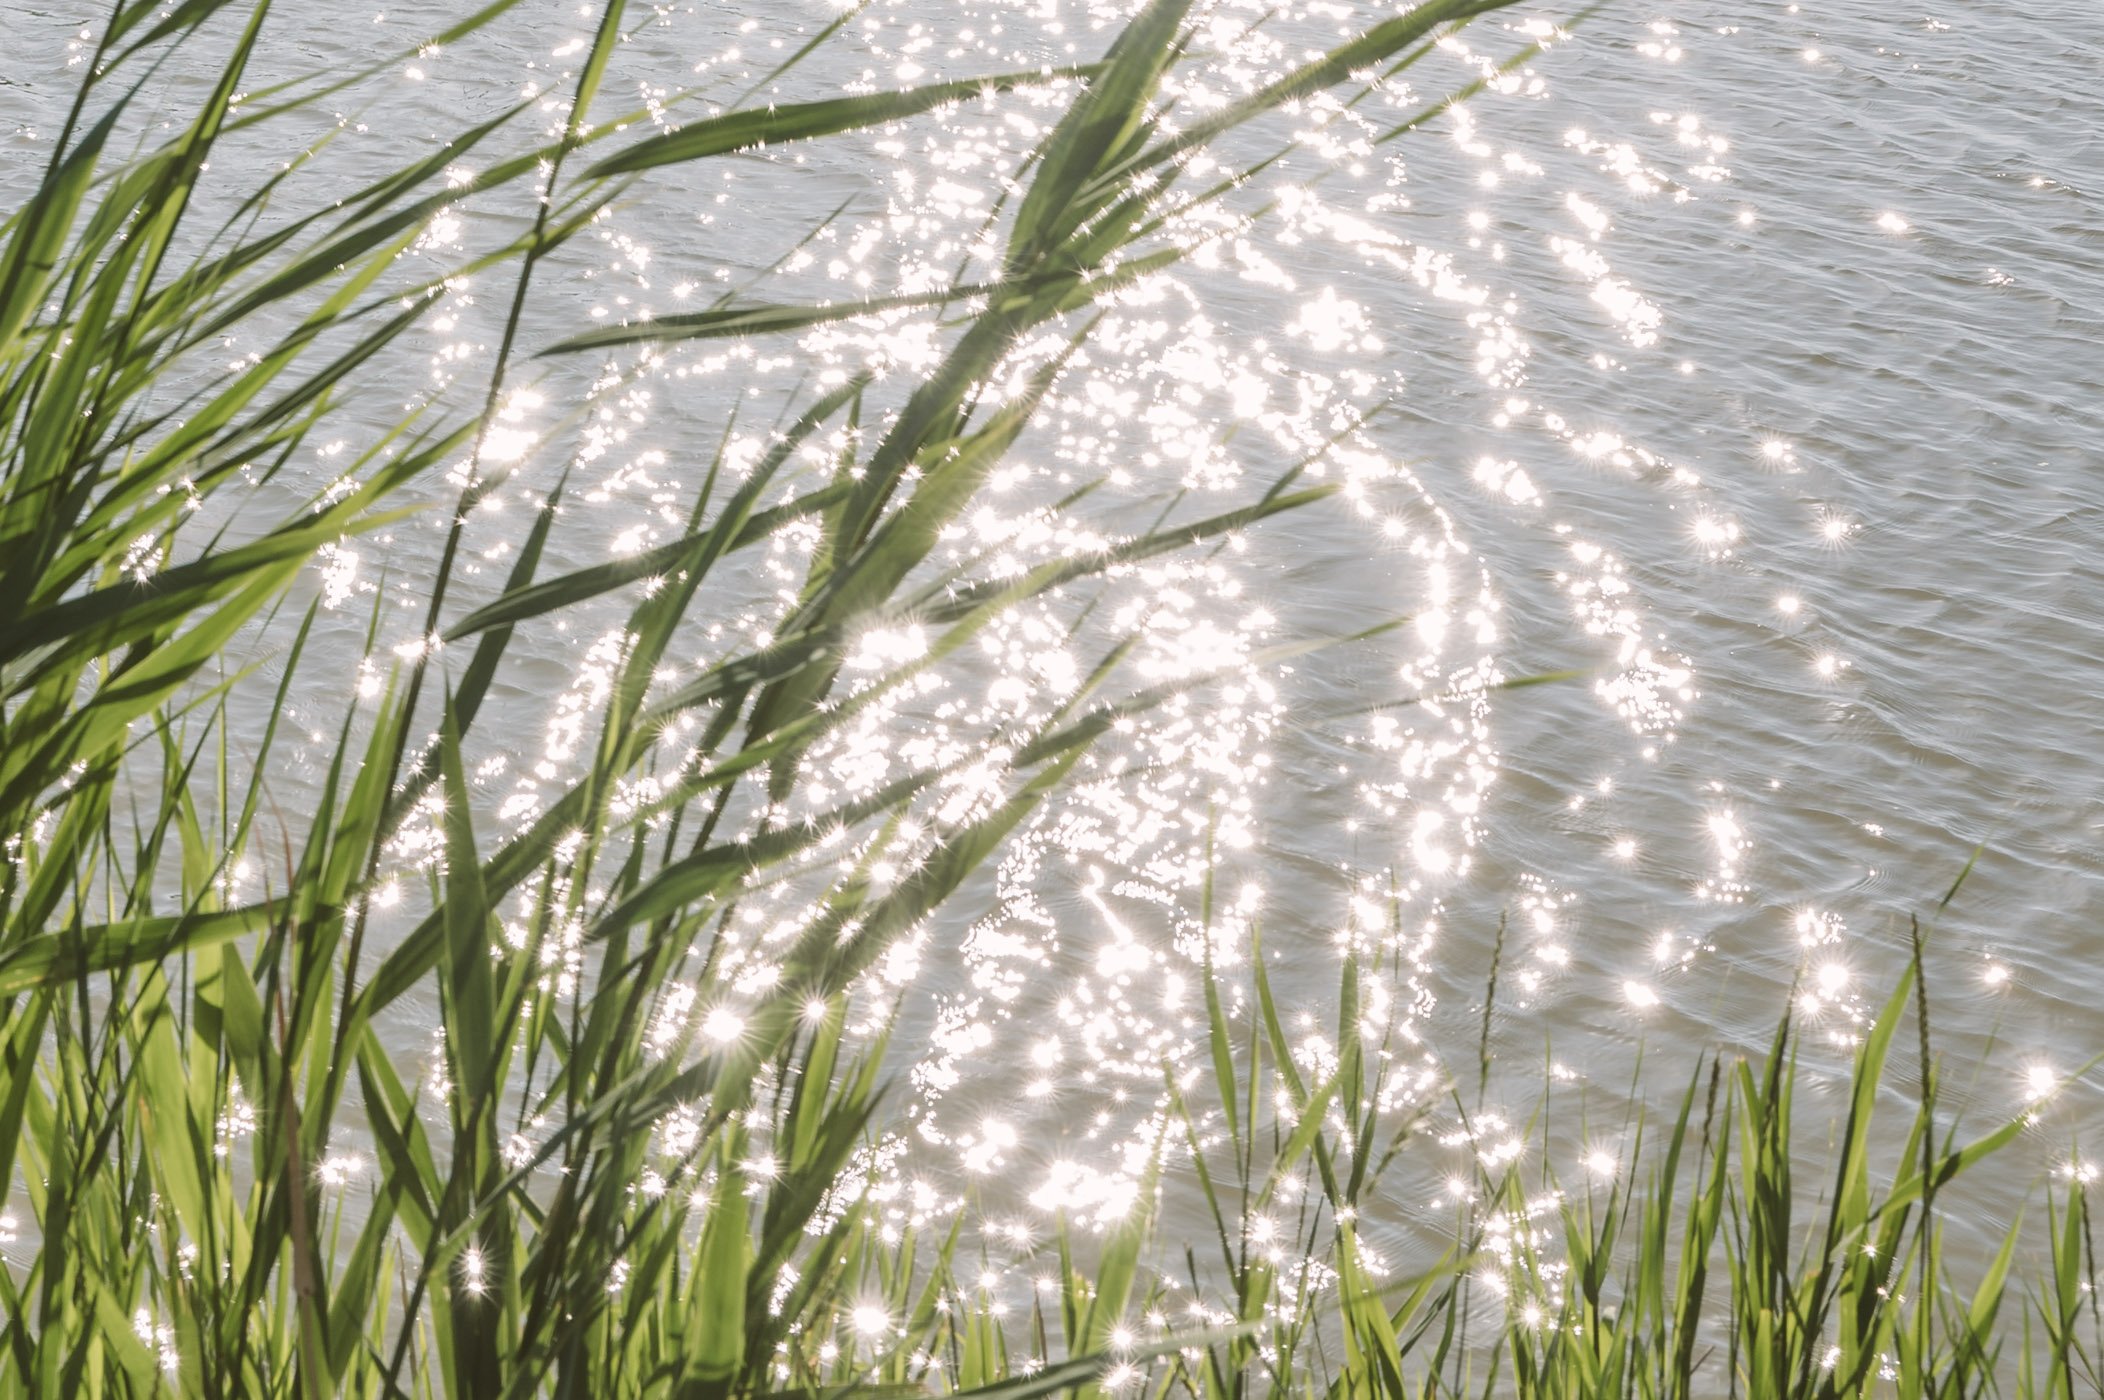 Sunlight reflects in the water of lake Neusiedlersee